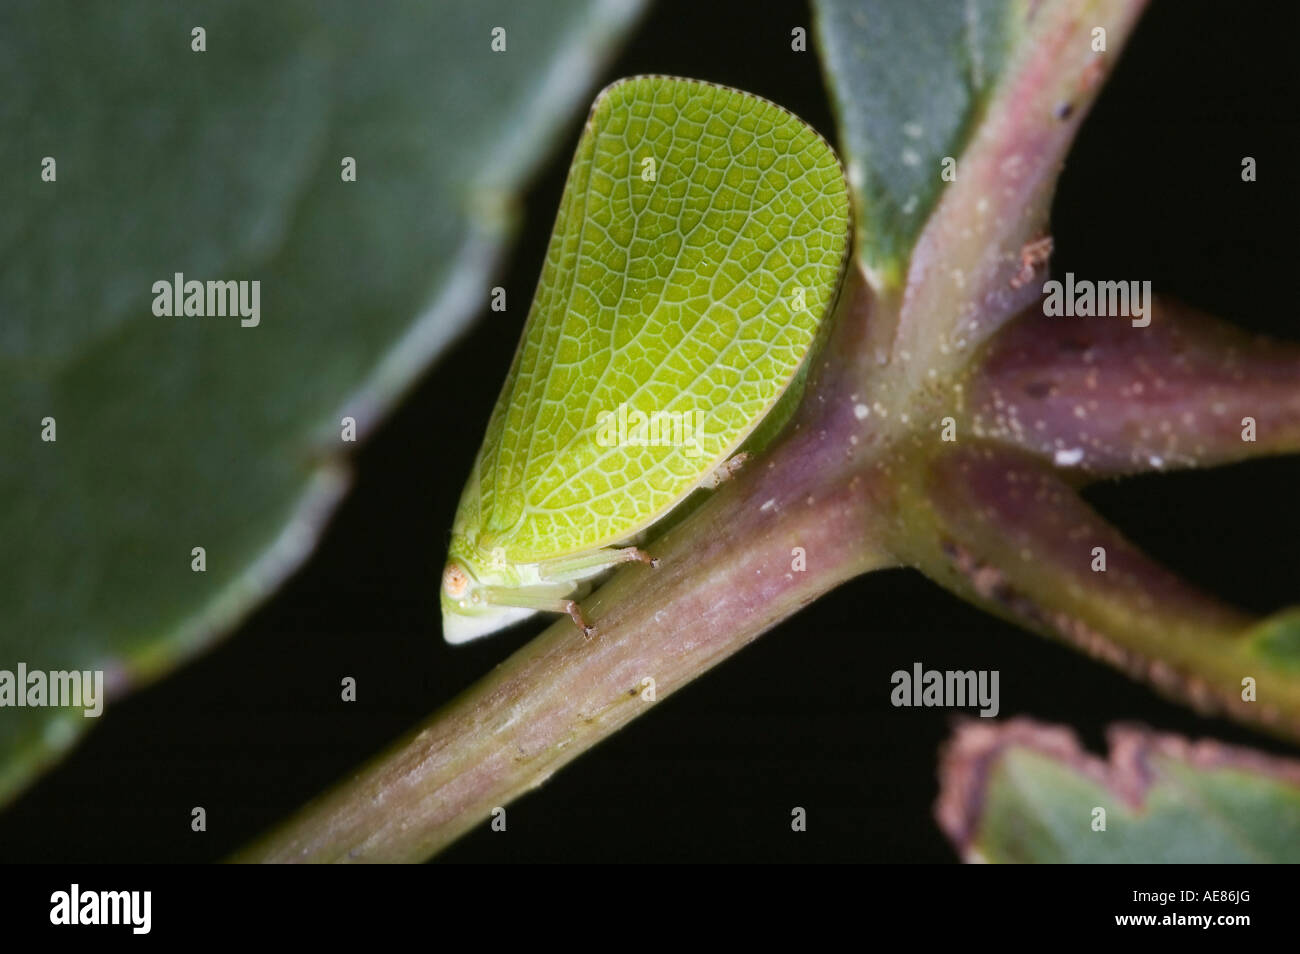 Leaf insect on a branch Stock Photo